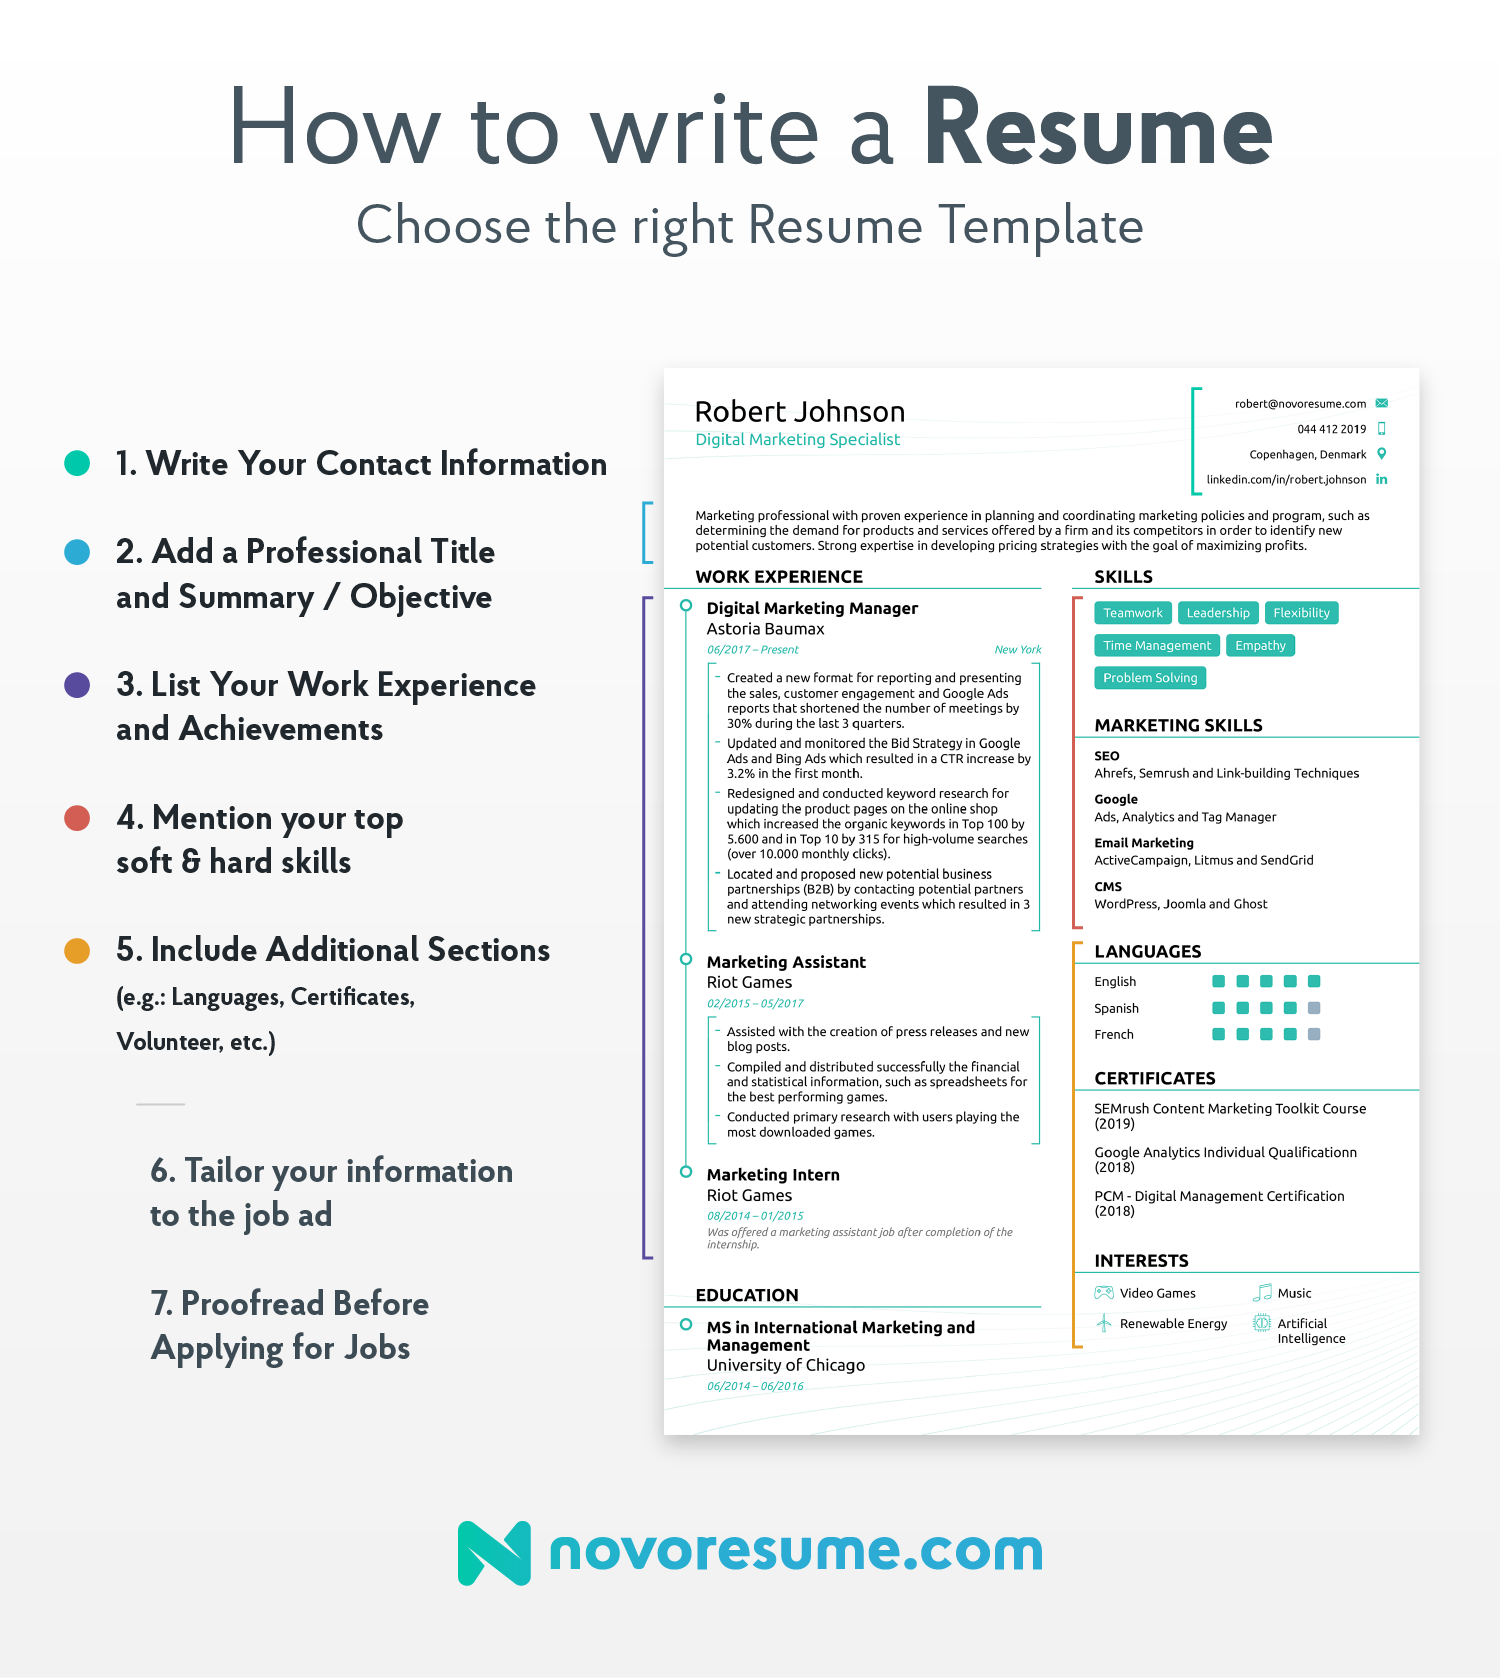 50 Reasons to resume in 2021